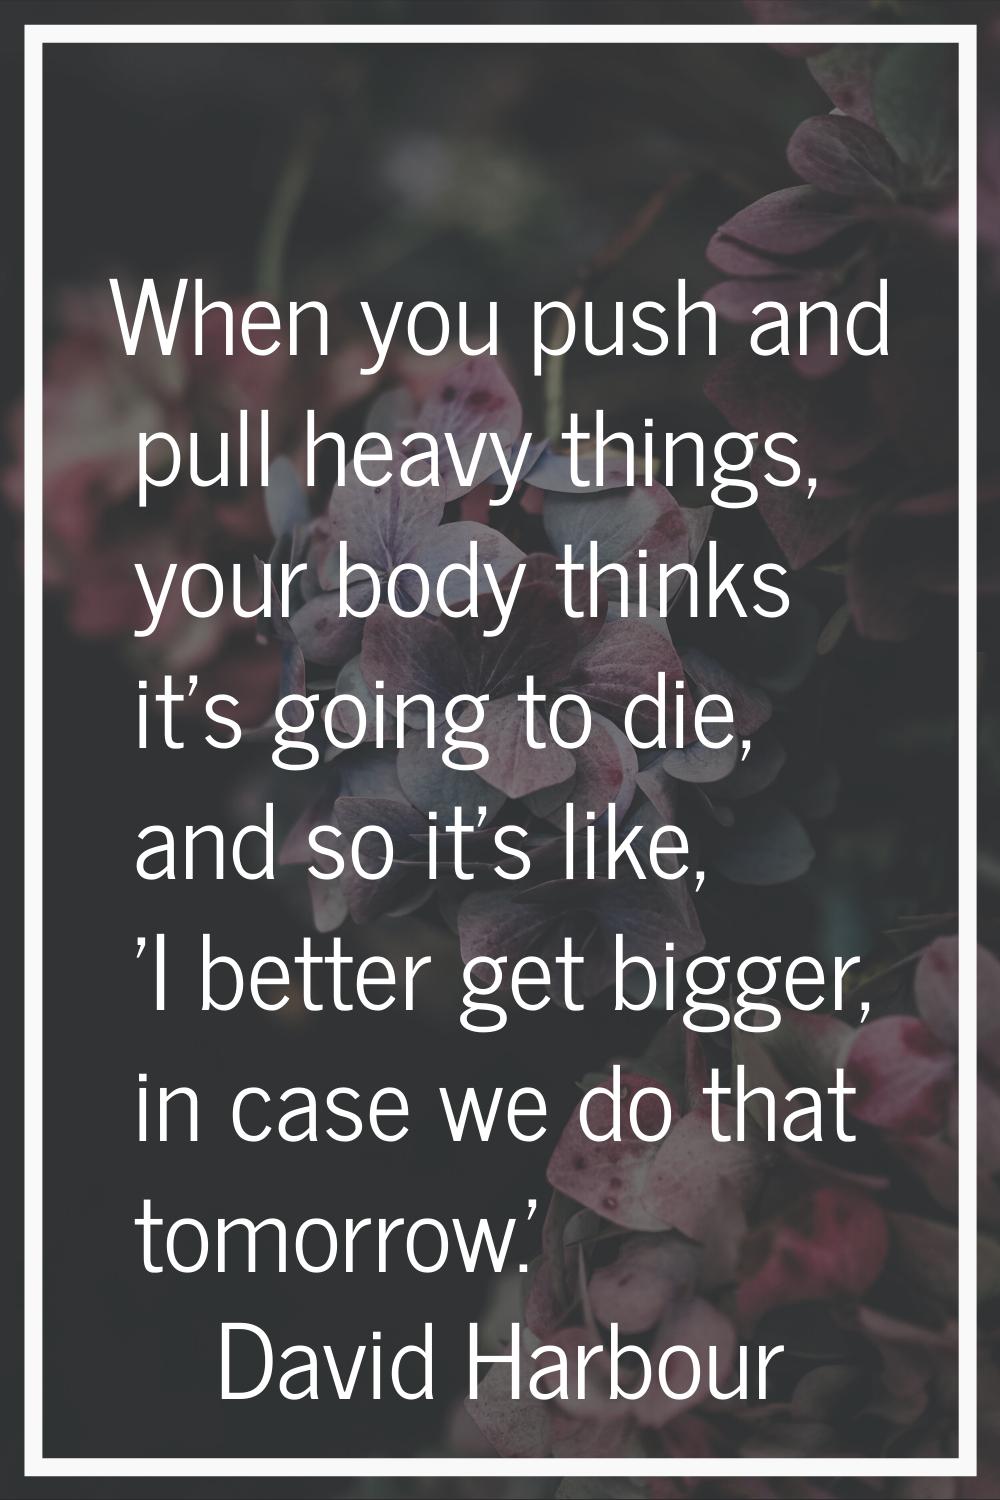 When you push and pull heavy things, your body thinks it's going to die, and so it's like, 'I bette